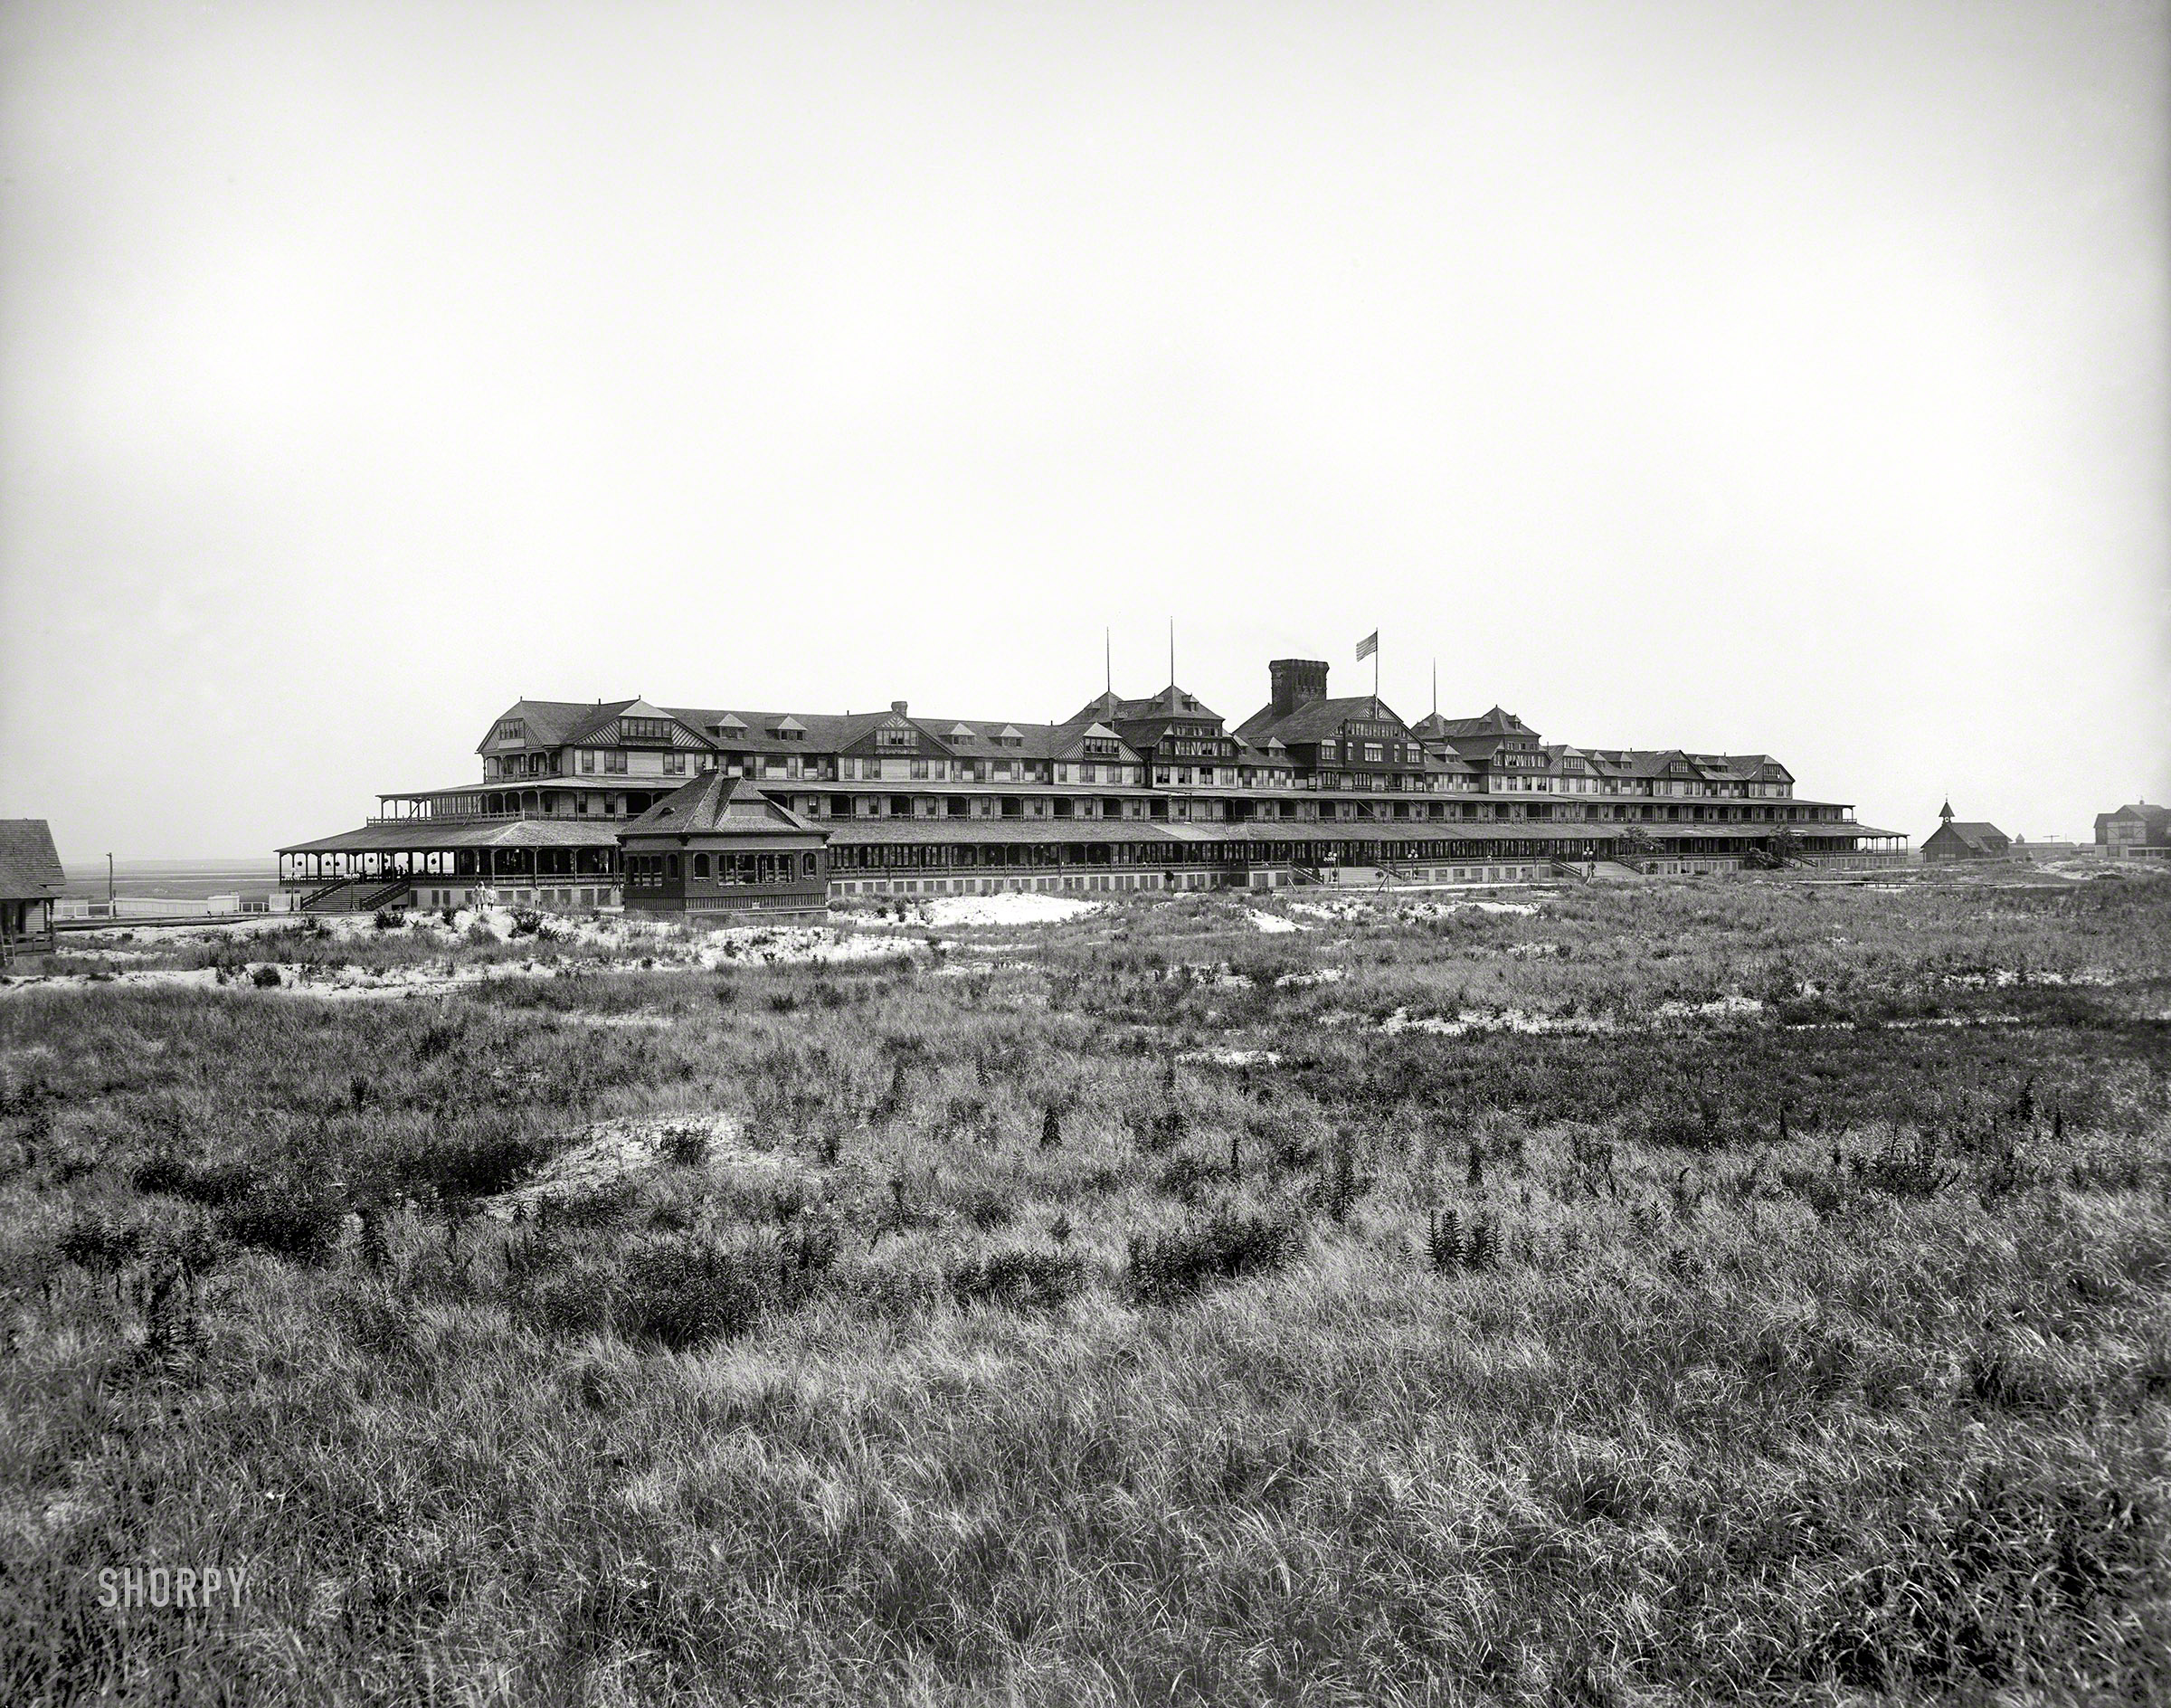 Circa 1904. "Long Beach Hotel, Long Beach, Long Island, N.Y." On July 29, 1907, this "Riviera of the East" burned to the ground after an electrical fire broke out in an upstairs storeroom. 8x10 inch glass negative. View full size.